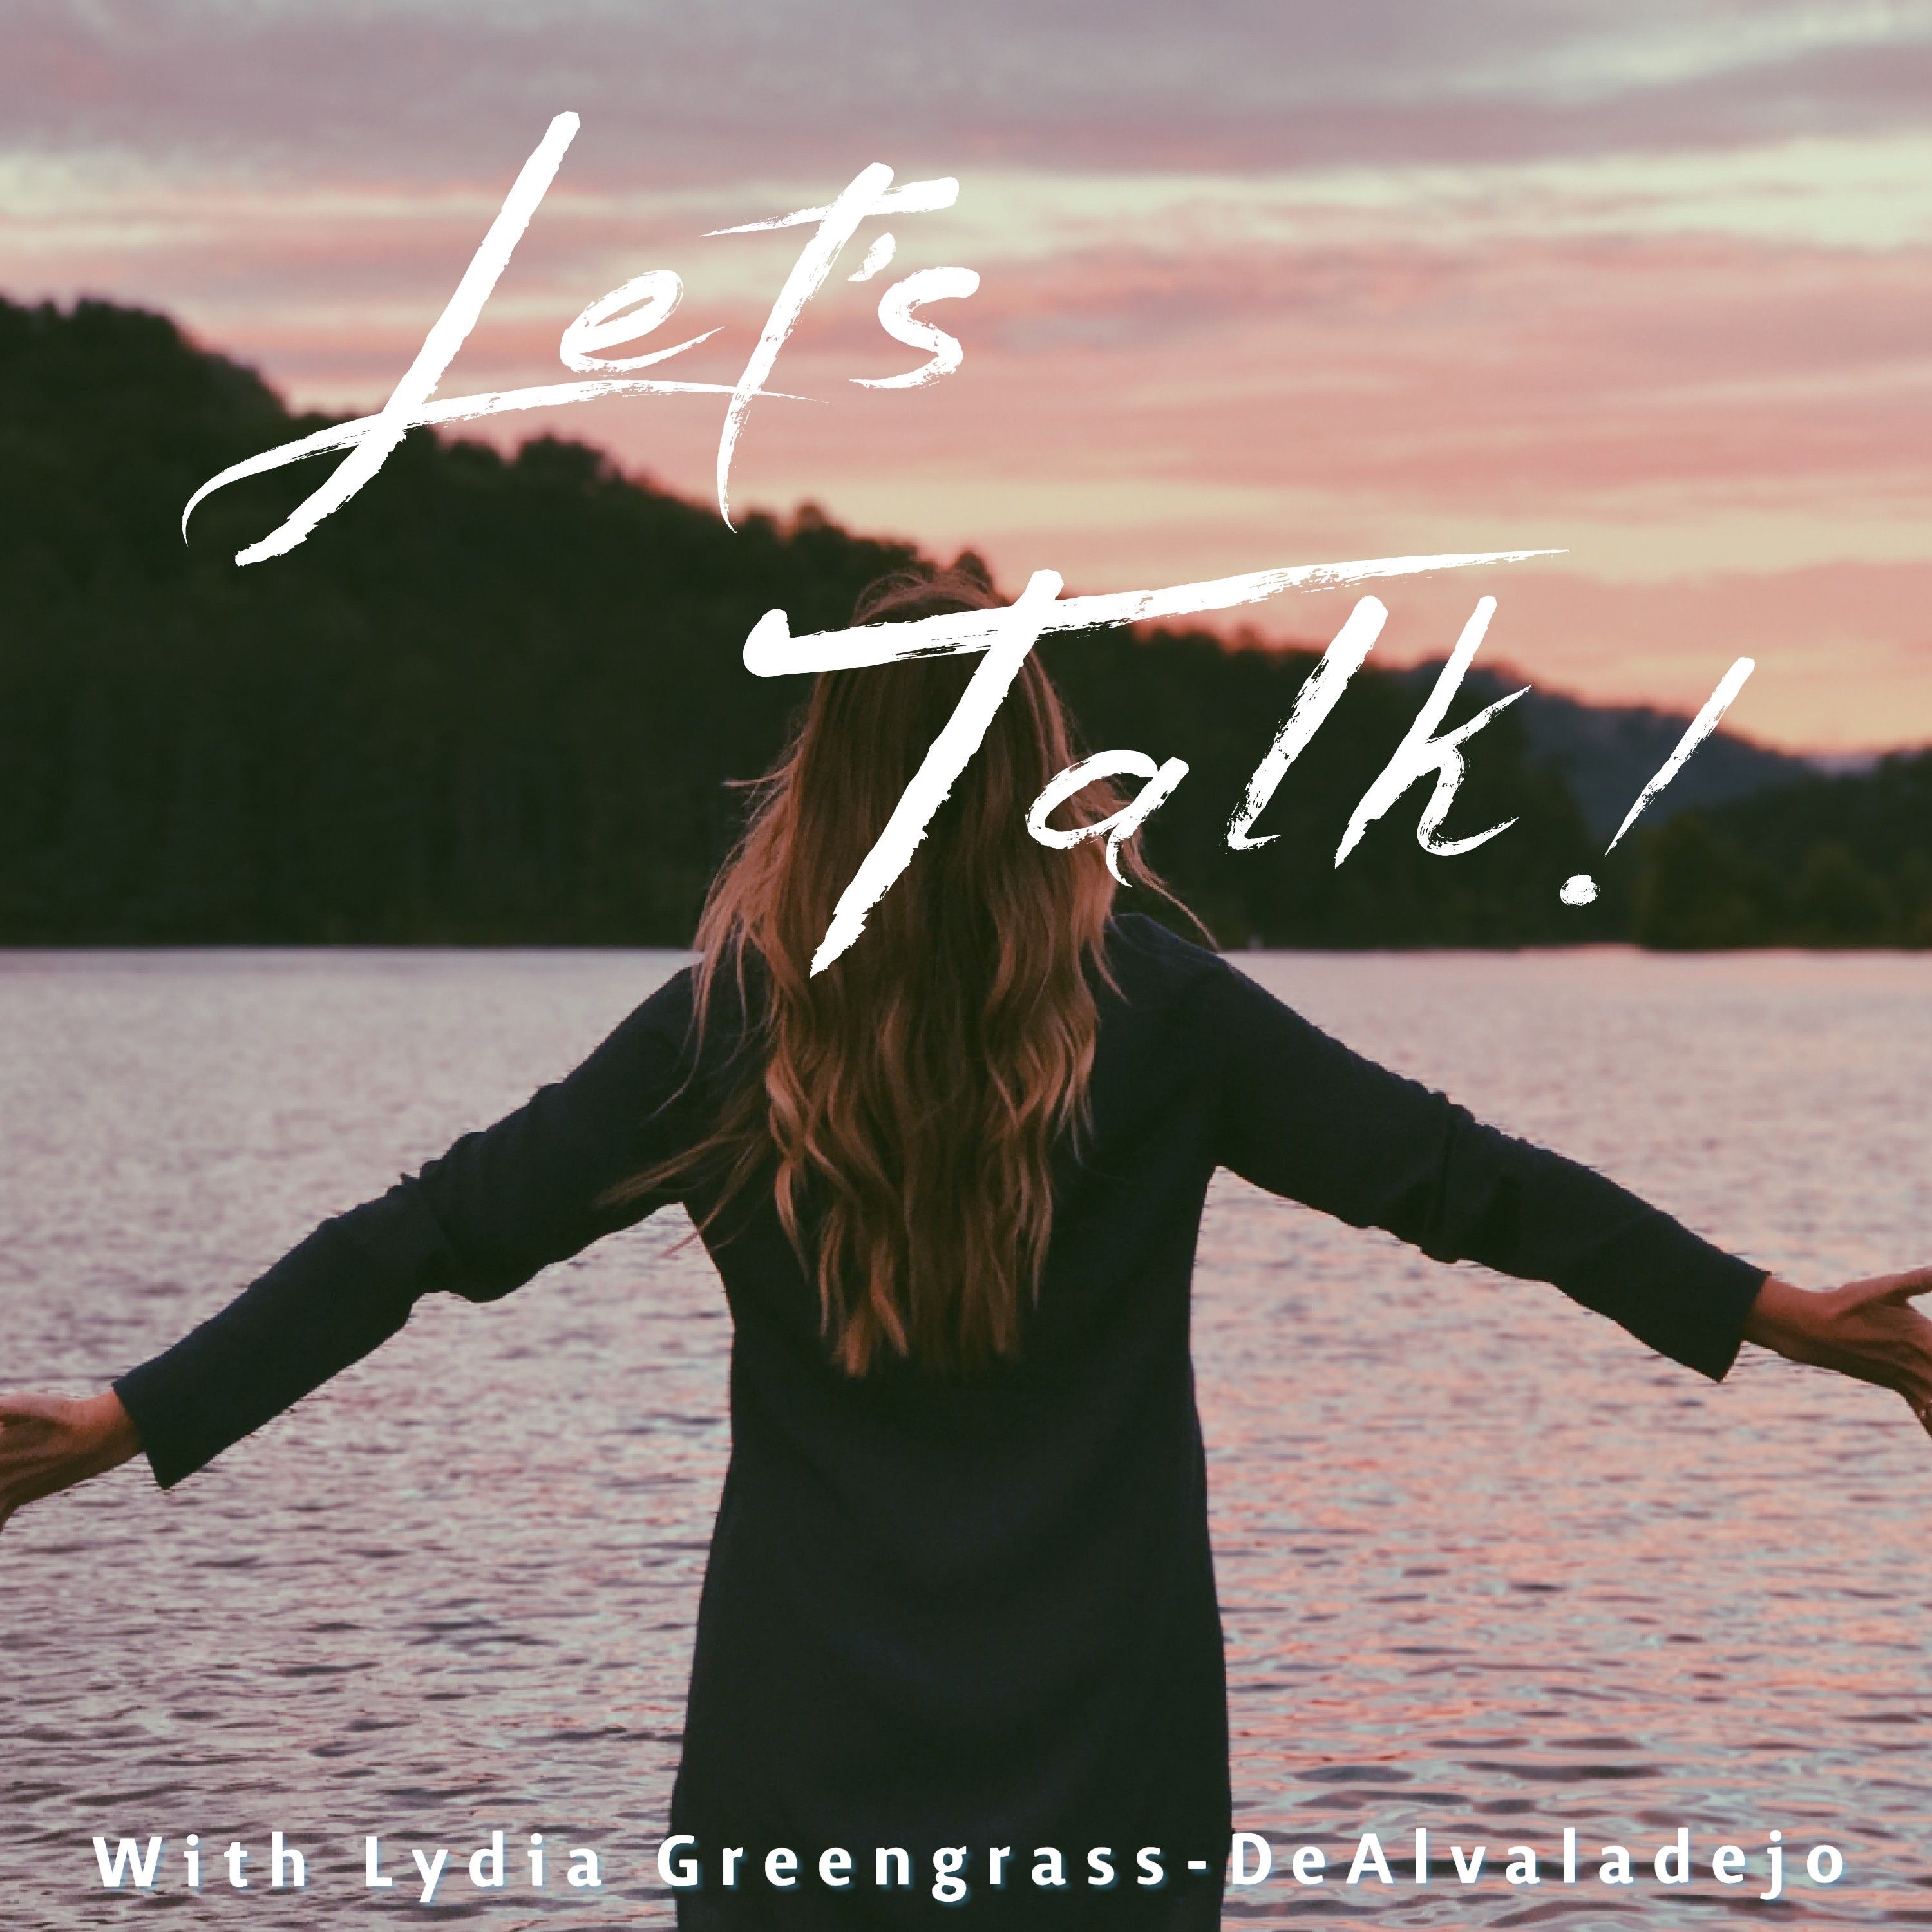 NEW EARIOS COMEDY SERIES! Let’s Talk with Lydia Greengrass-DeAlvaladejo